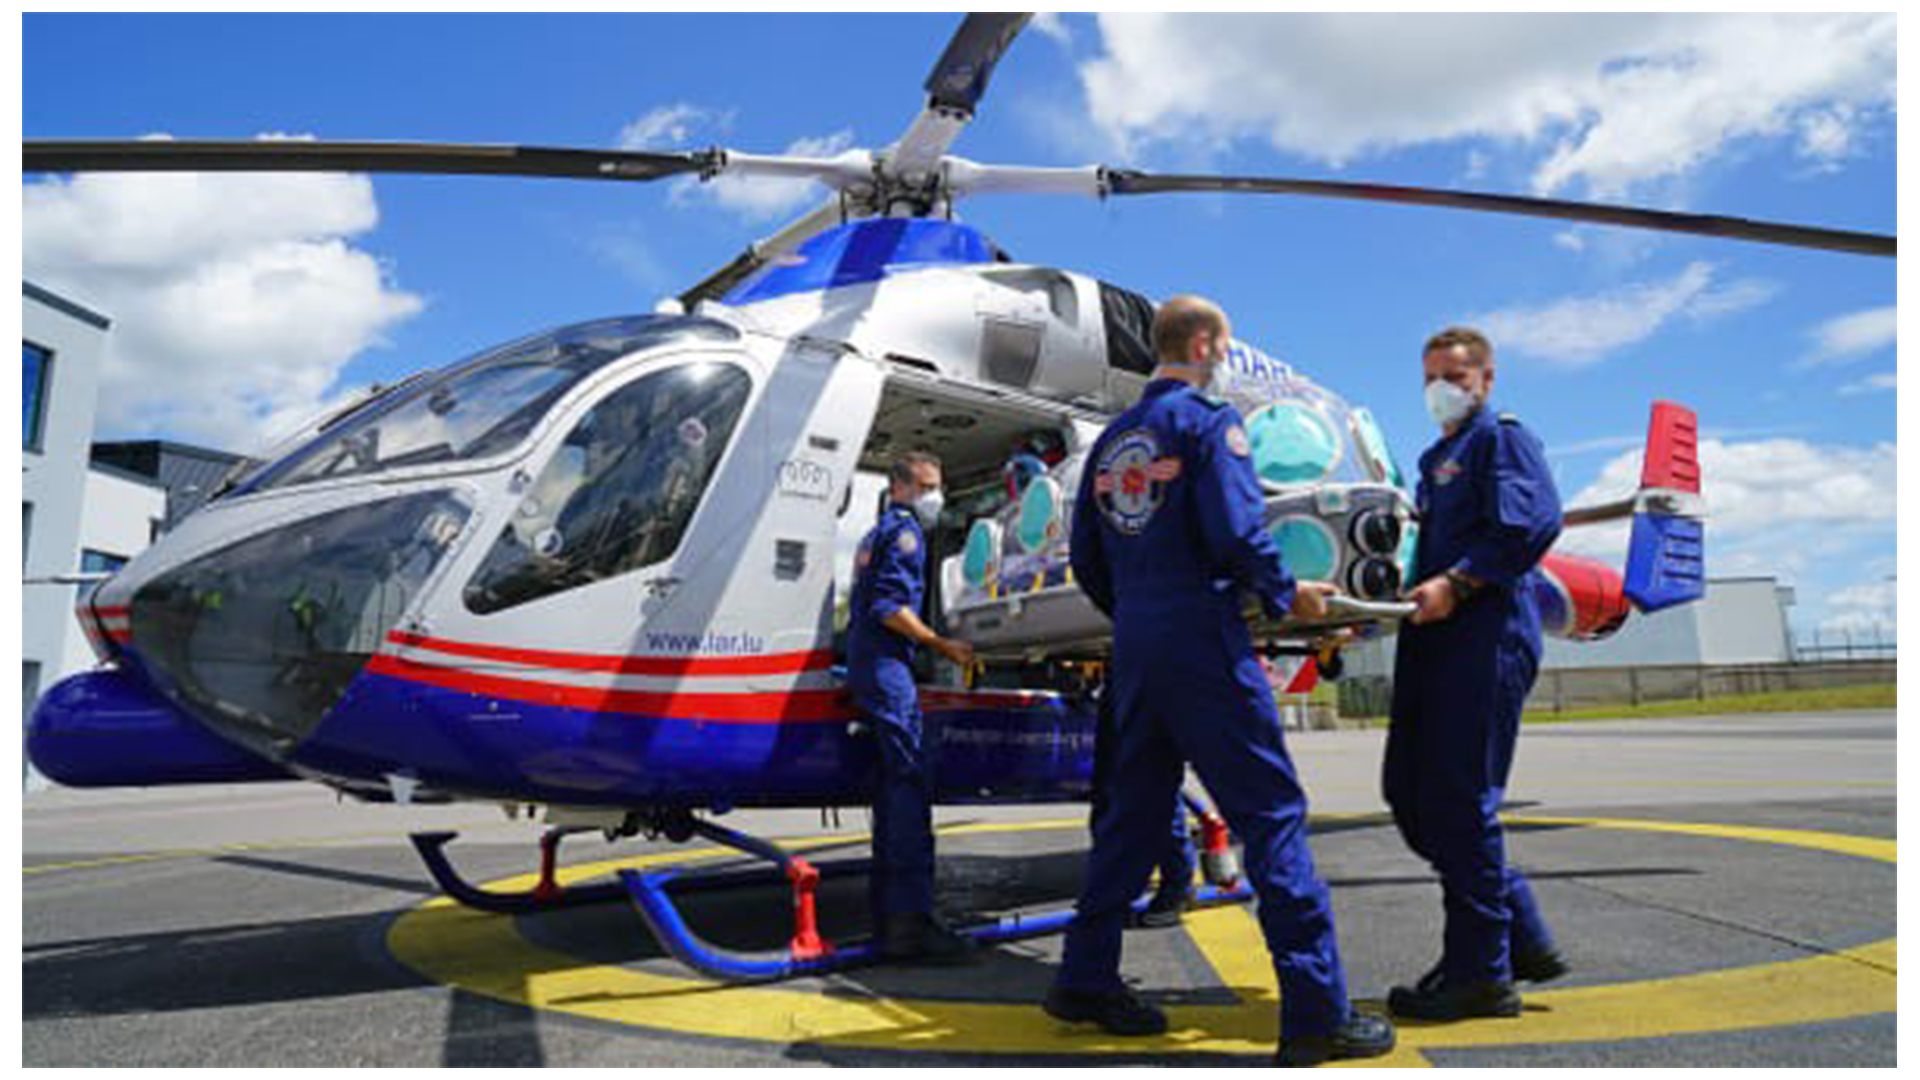 What is the history and background of the Great North Air Ambulance